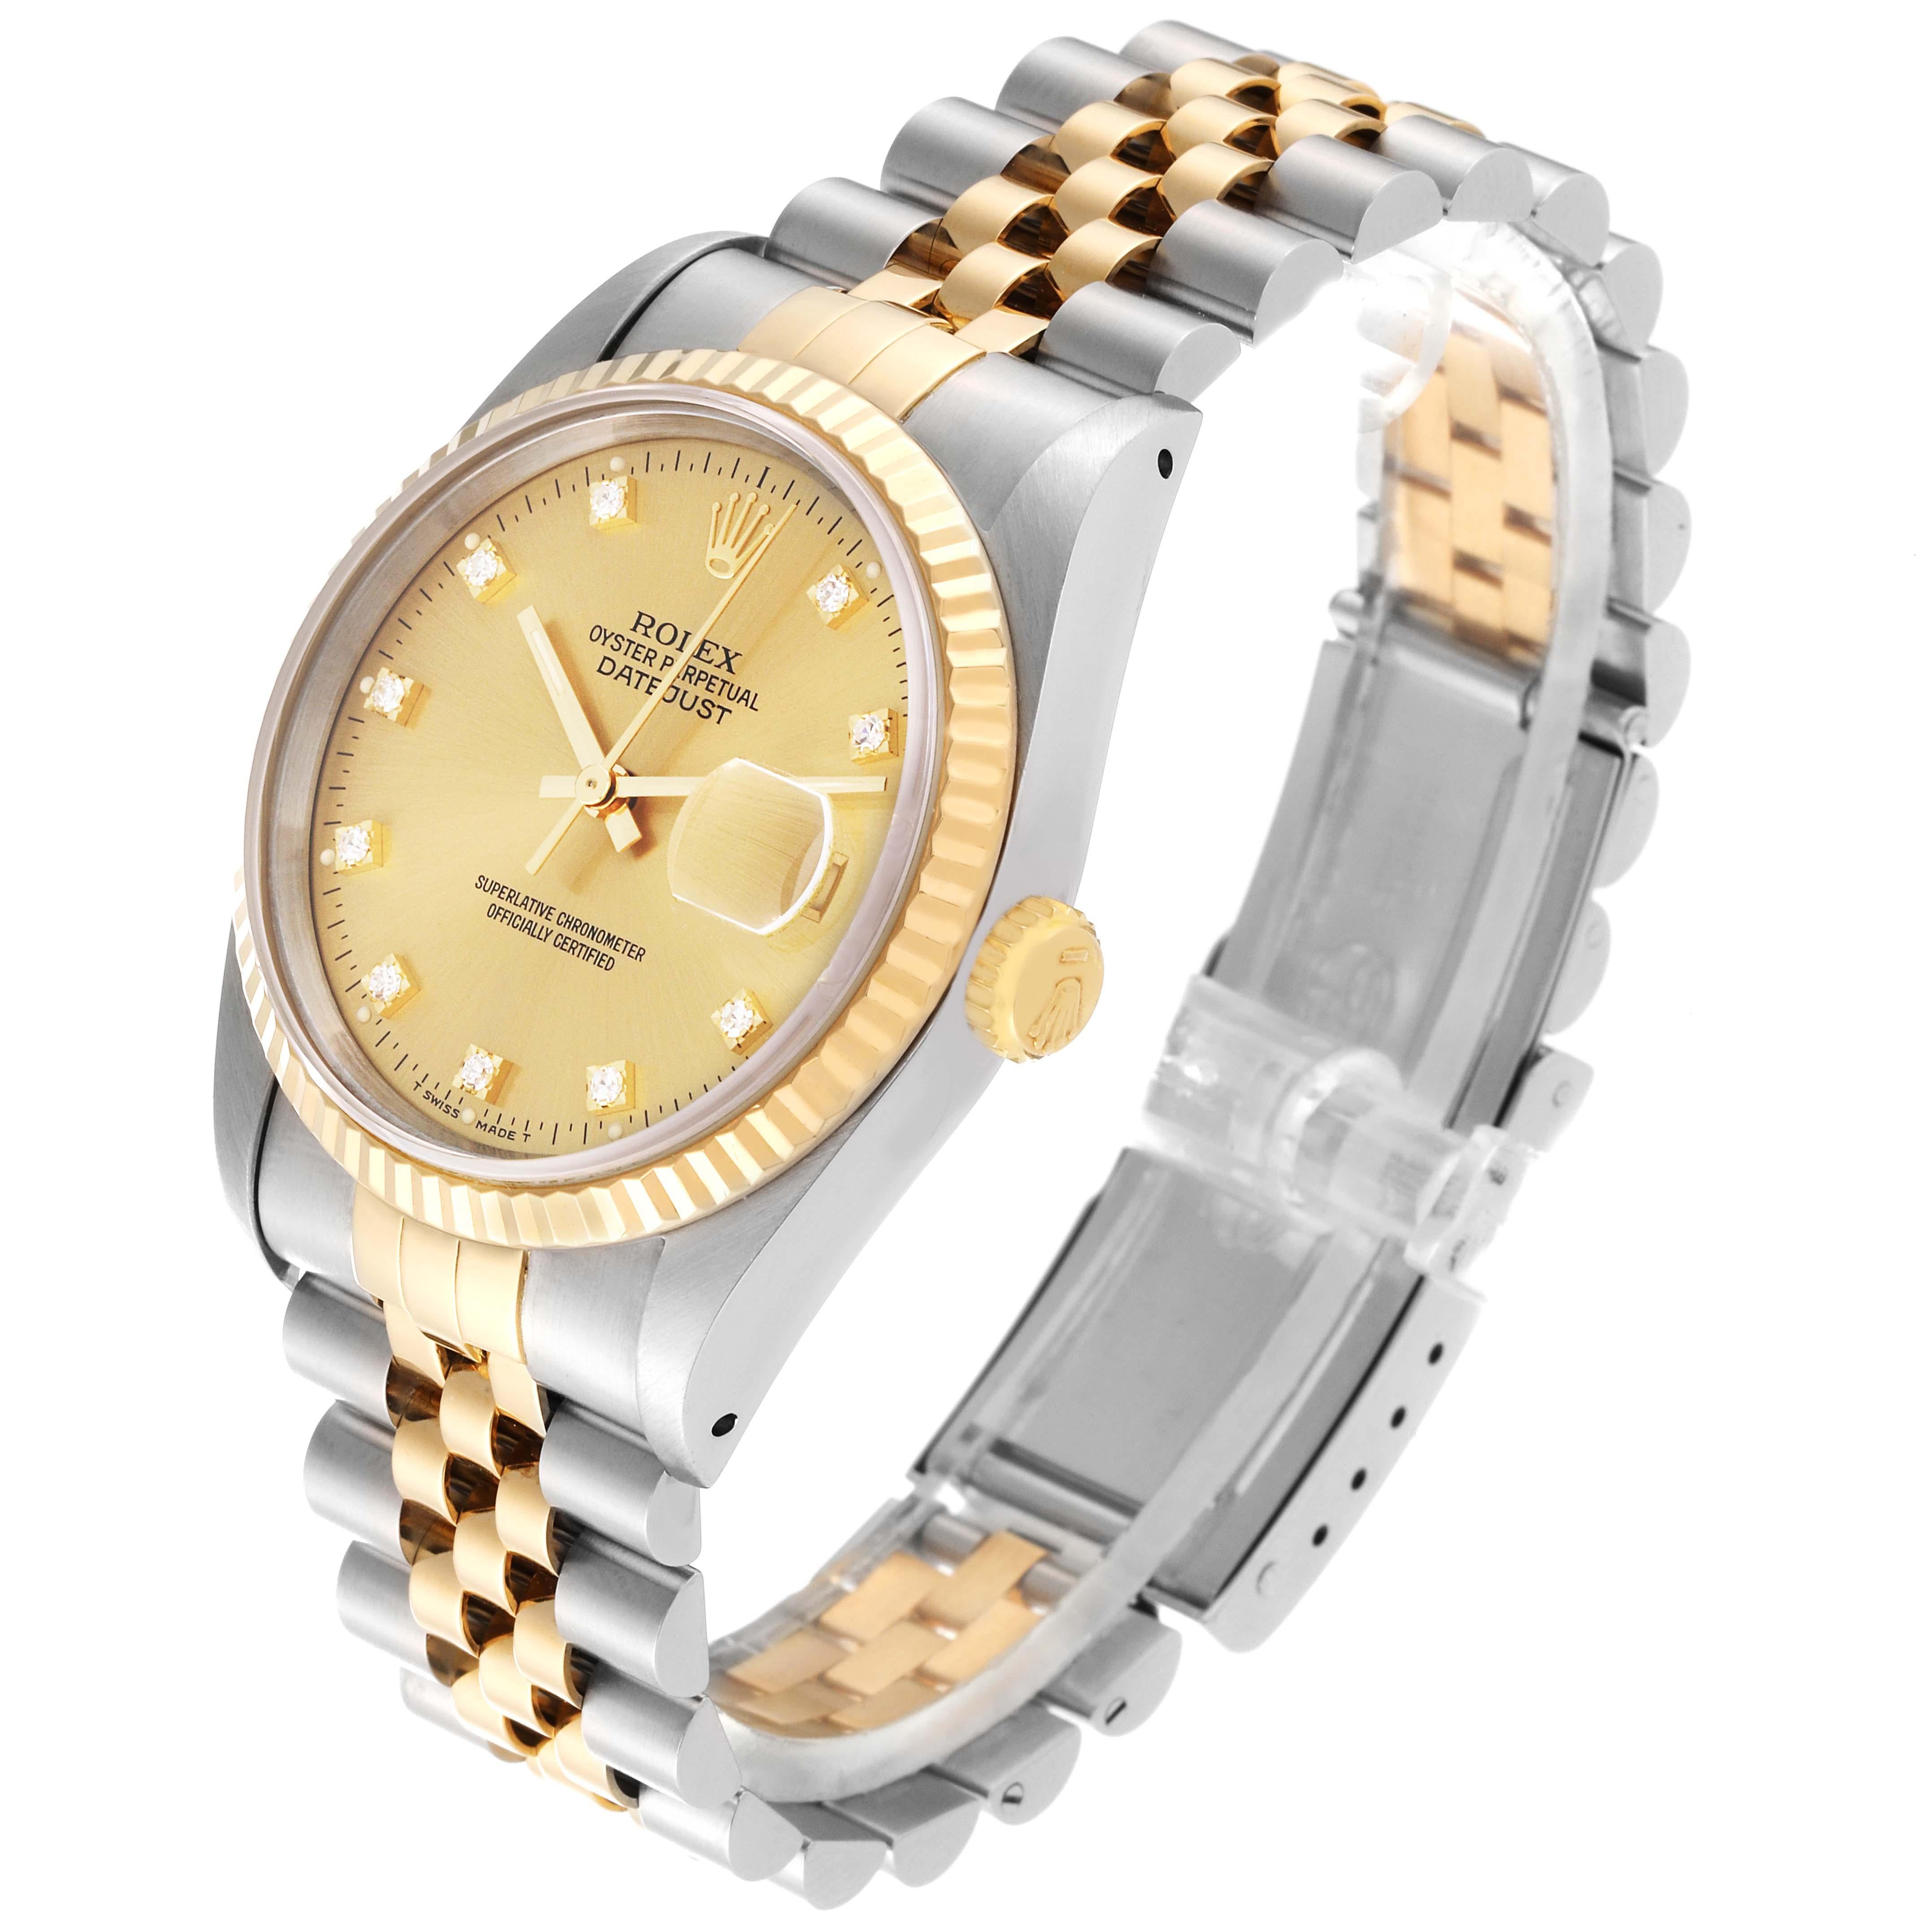 Rolex Datejust Champagne Diamond Dial Steel Yellow Gold Mens Watch 16233 For Sale 5